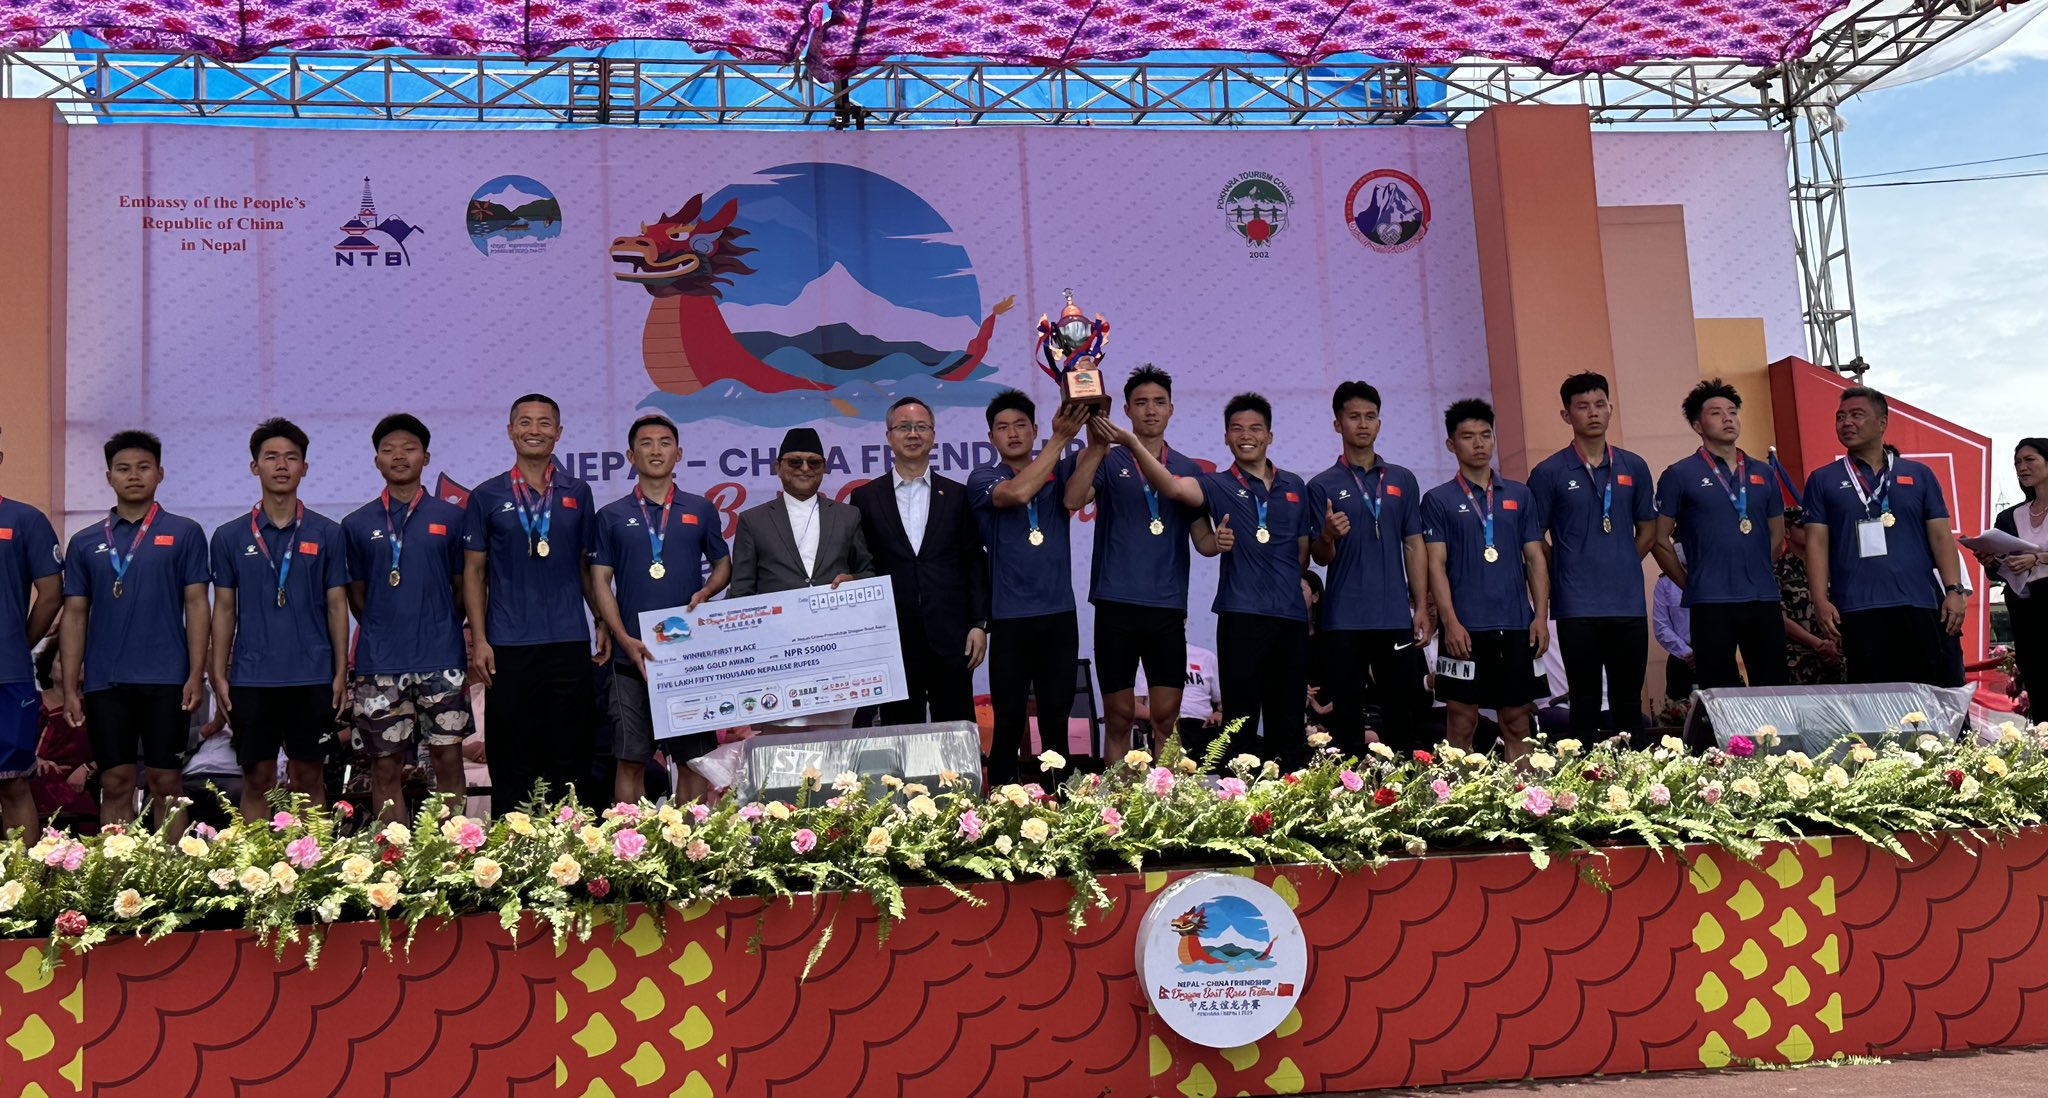 Sichuan team bags victory in Nepal-China Friendly "Dragon Boat Race"